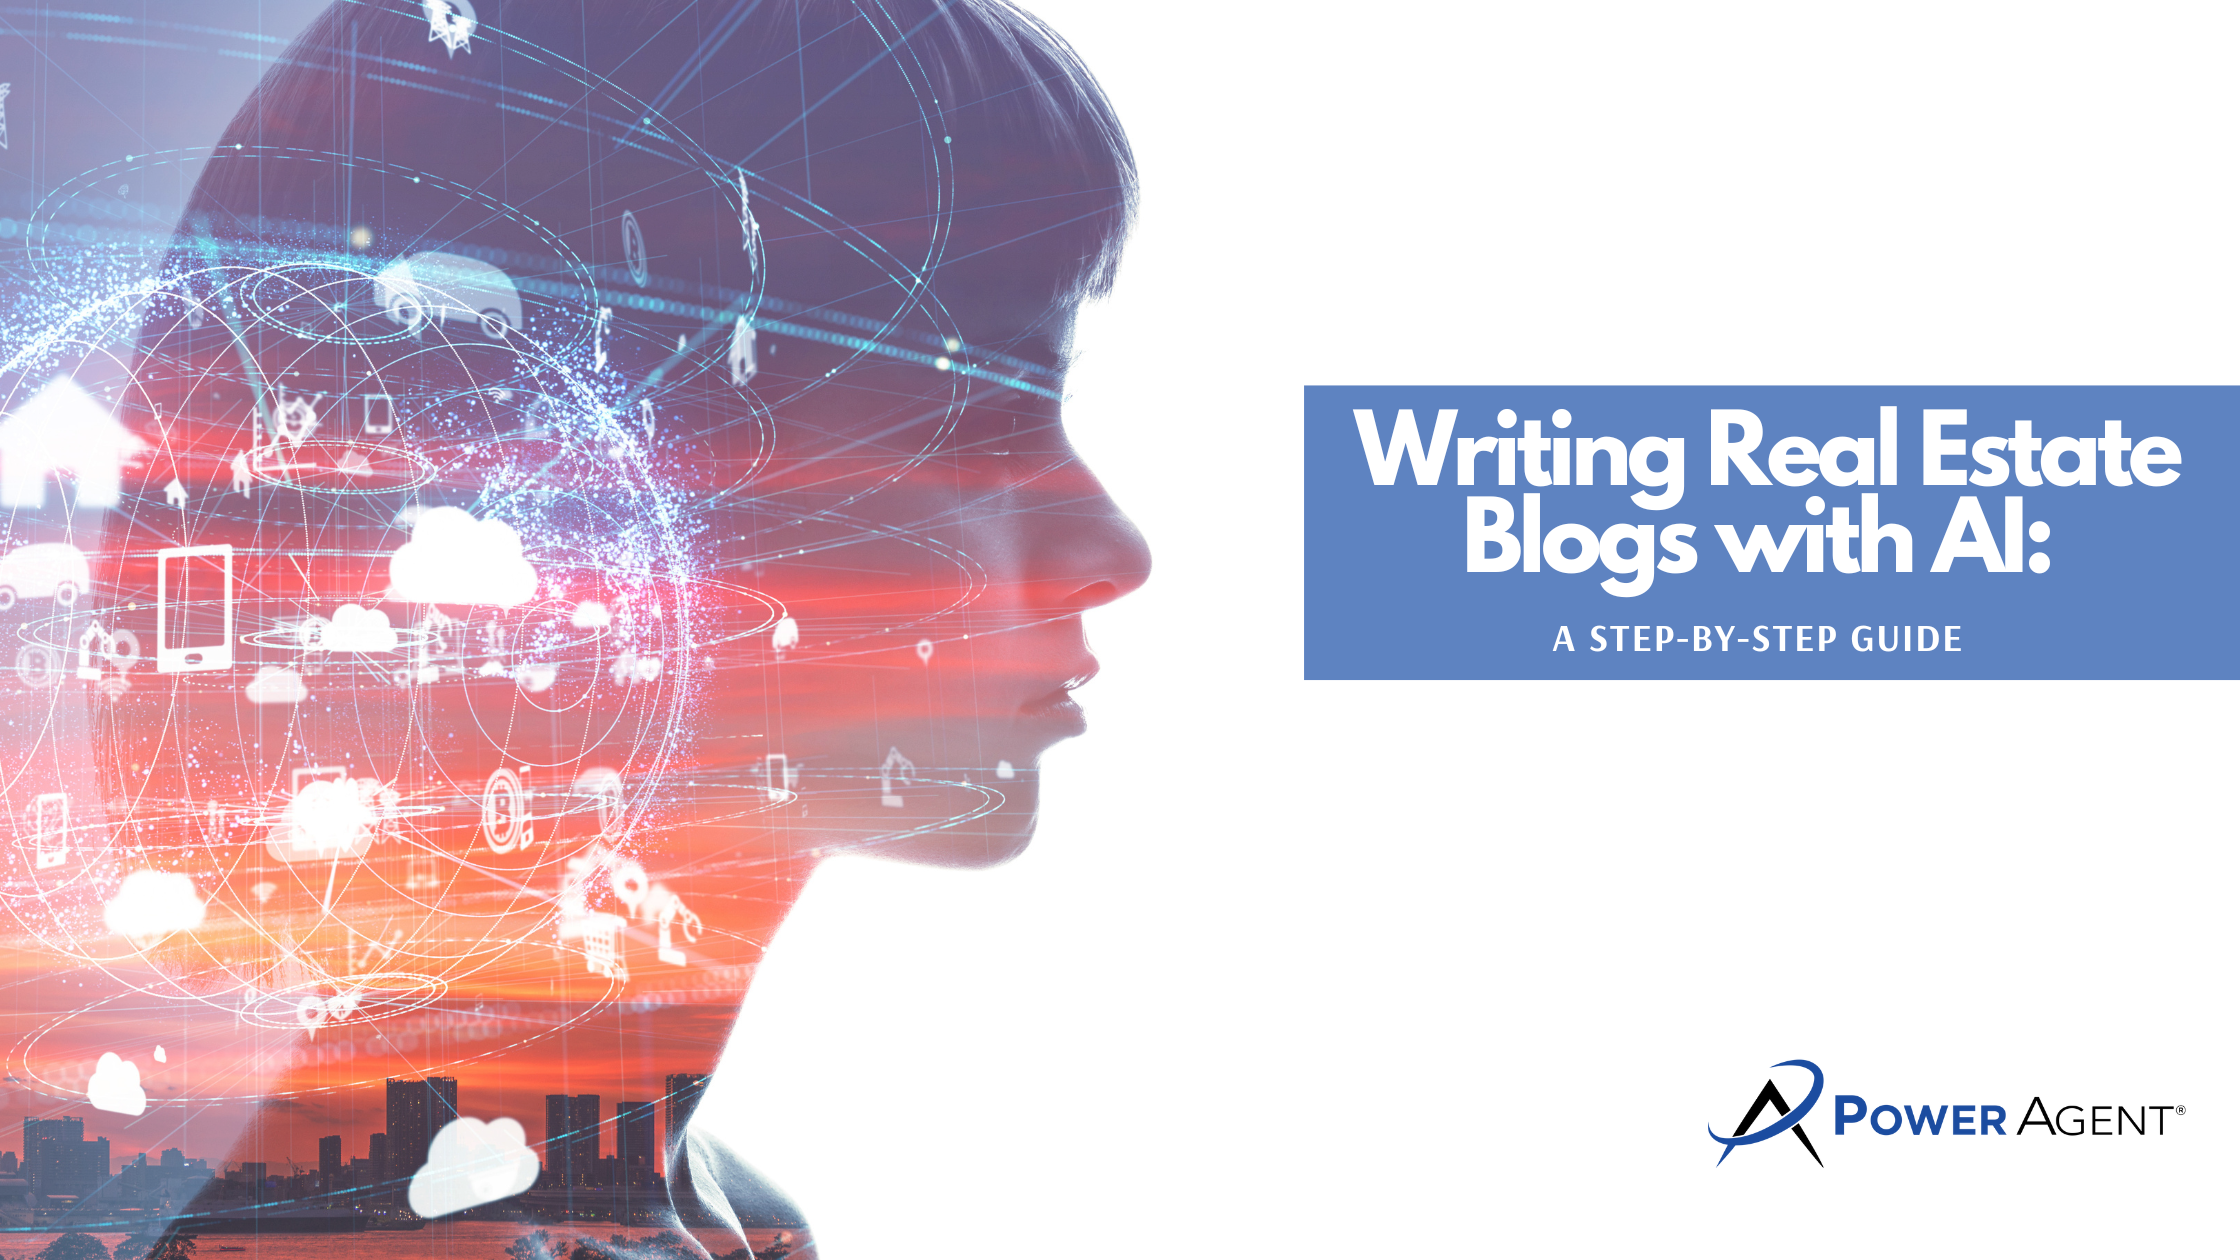 Guide to using AI to write your real estate blogs